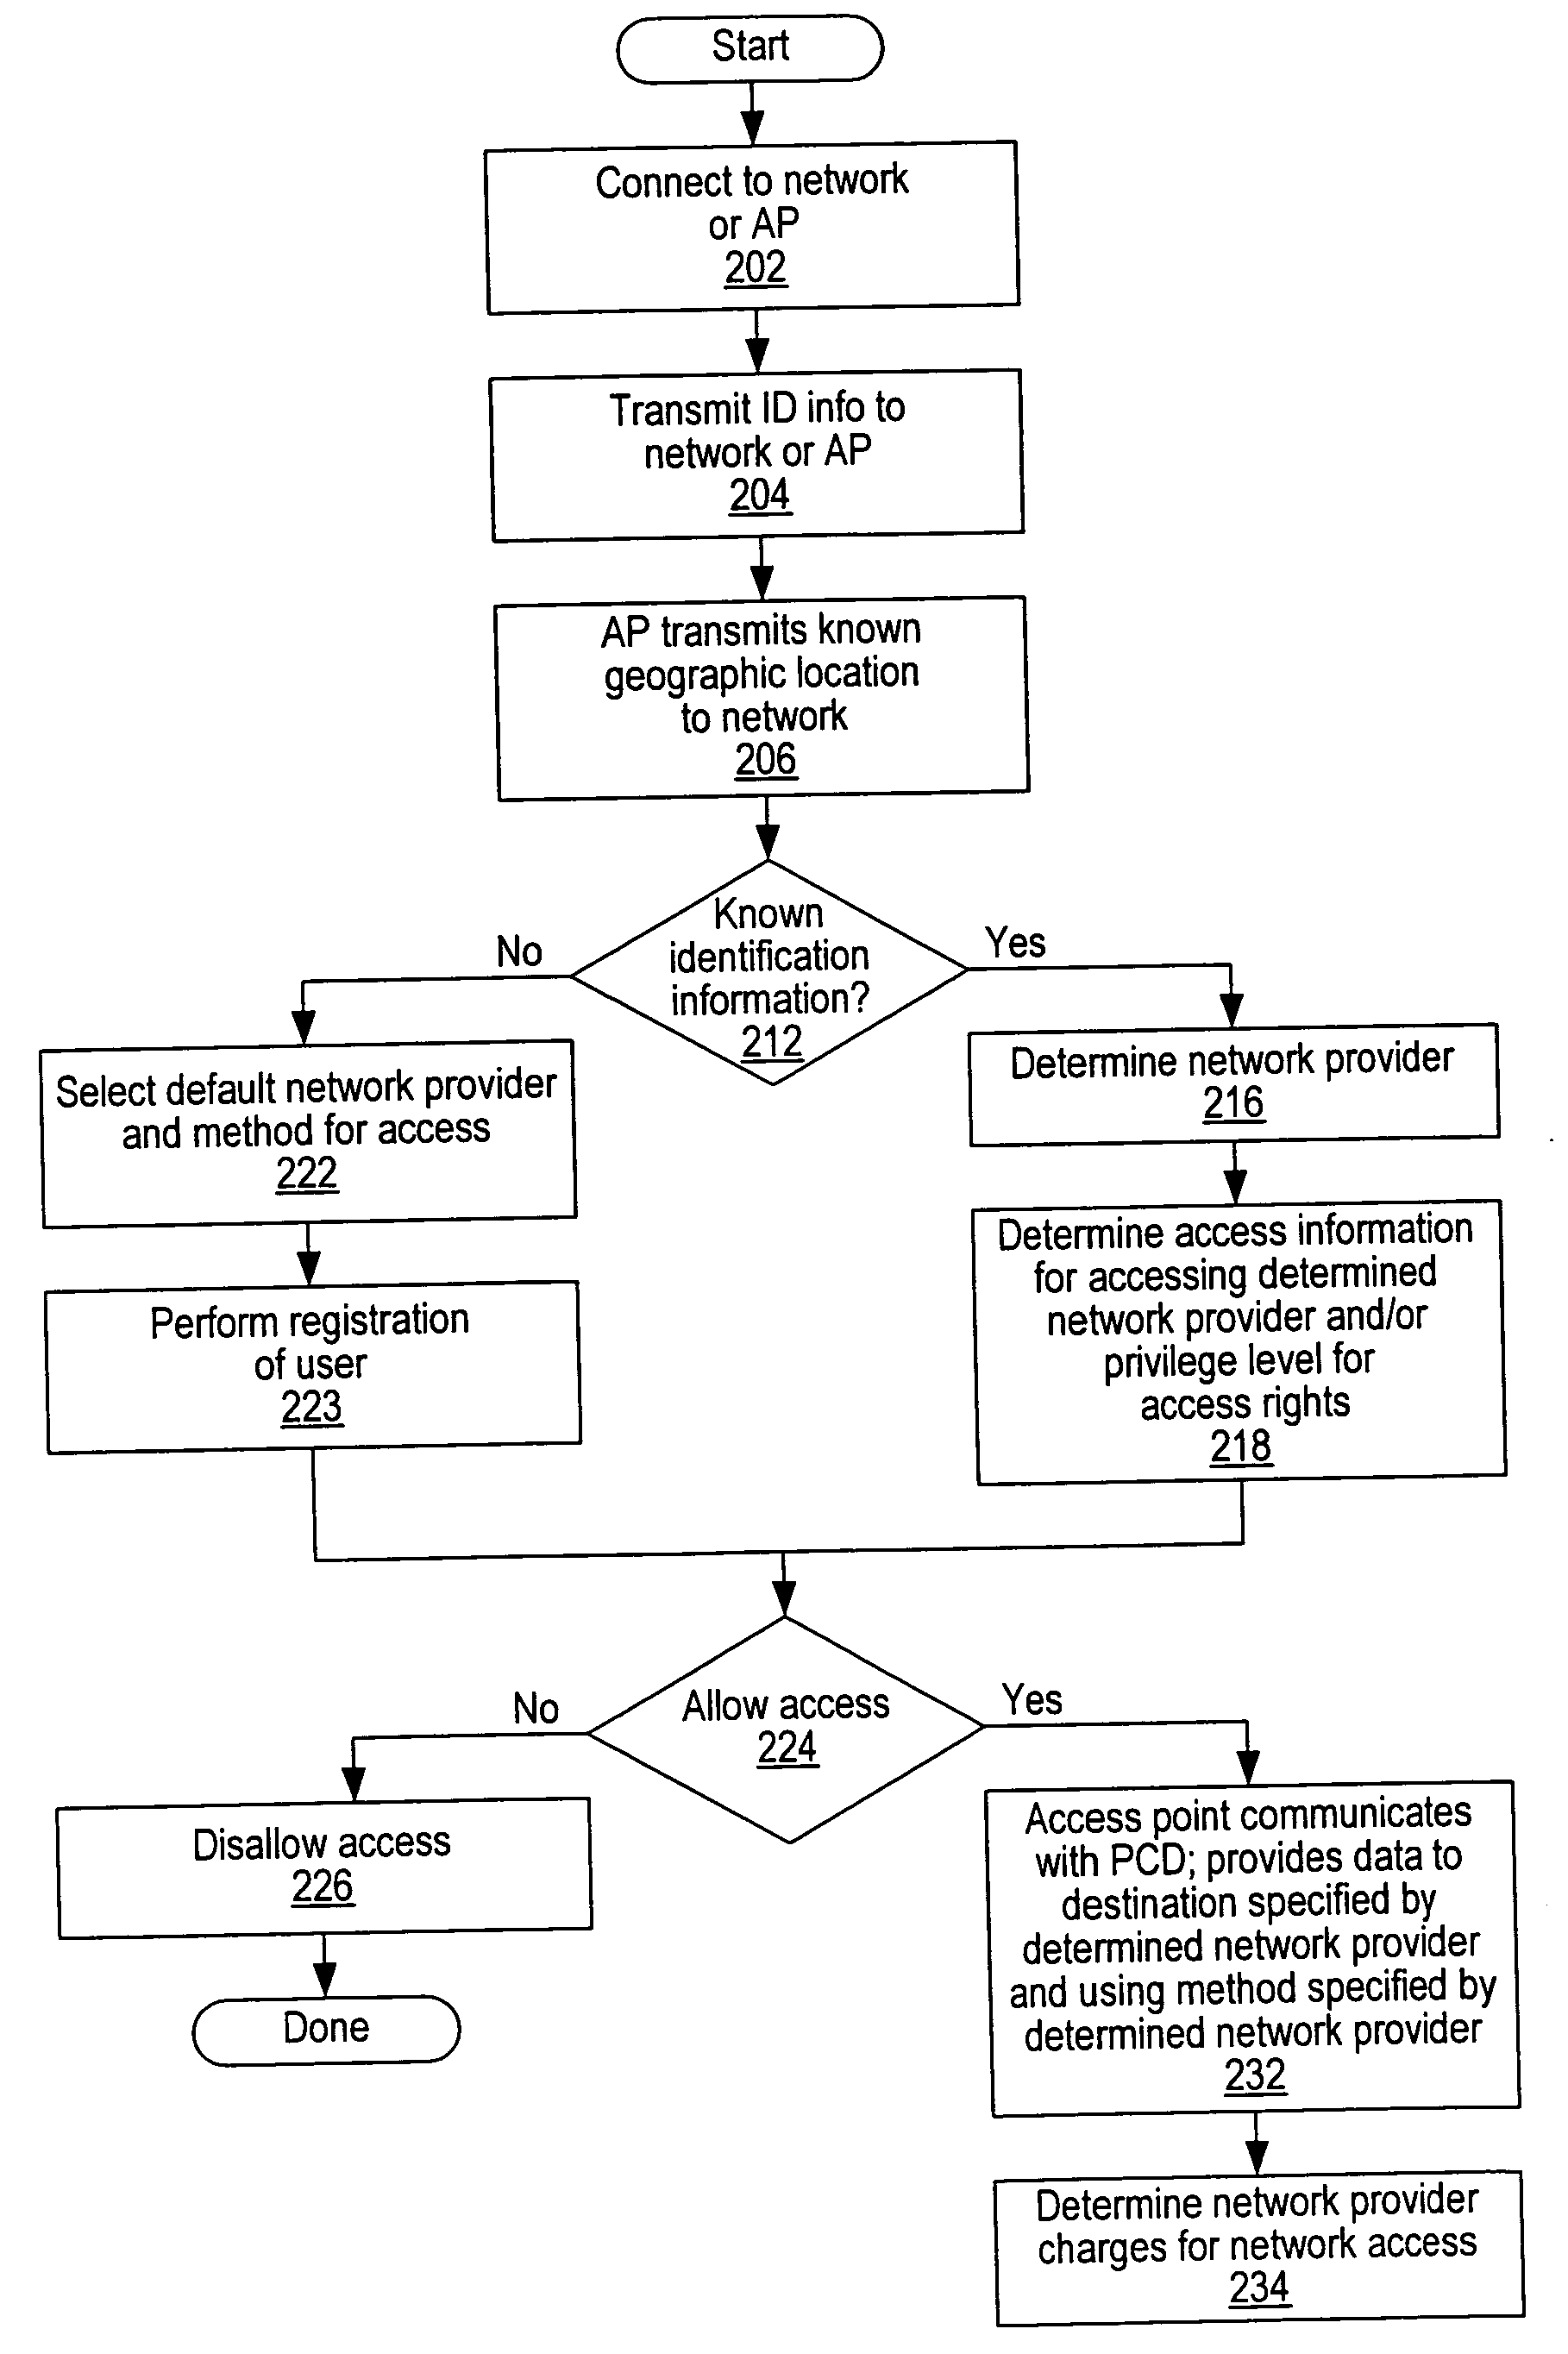 System and method for concurrently utilizing multiple system identifiers